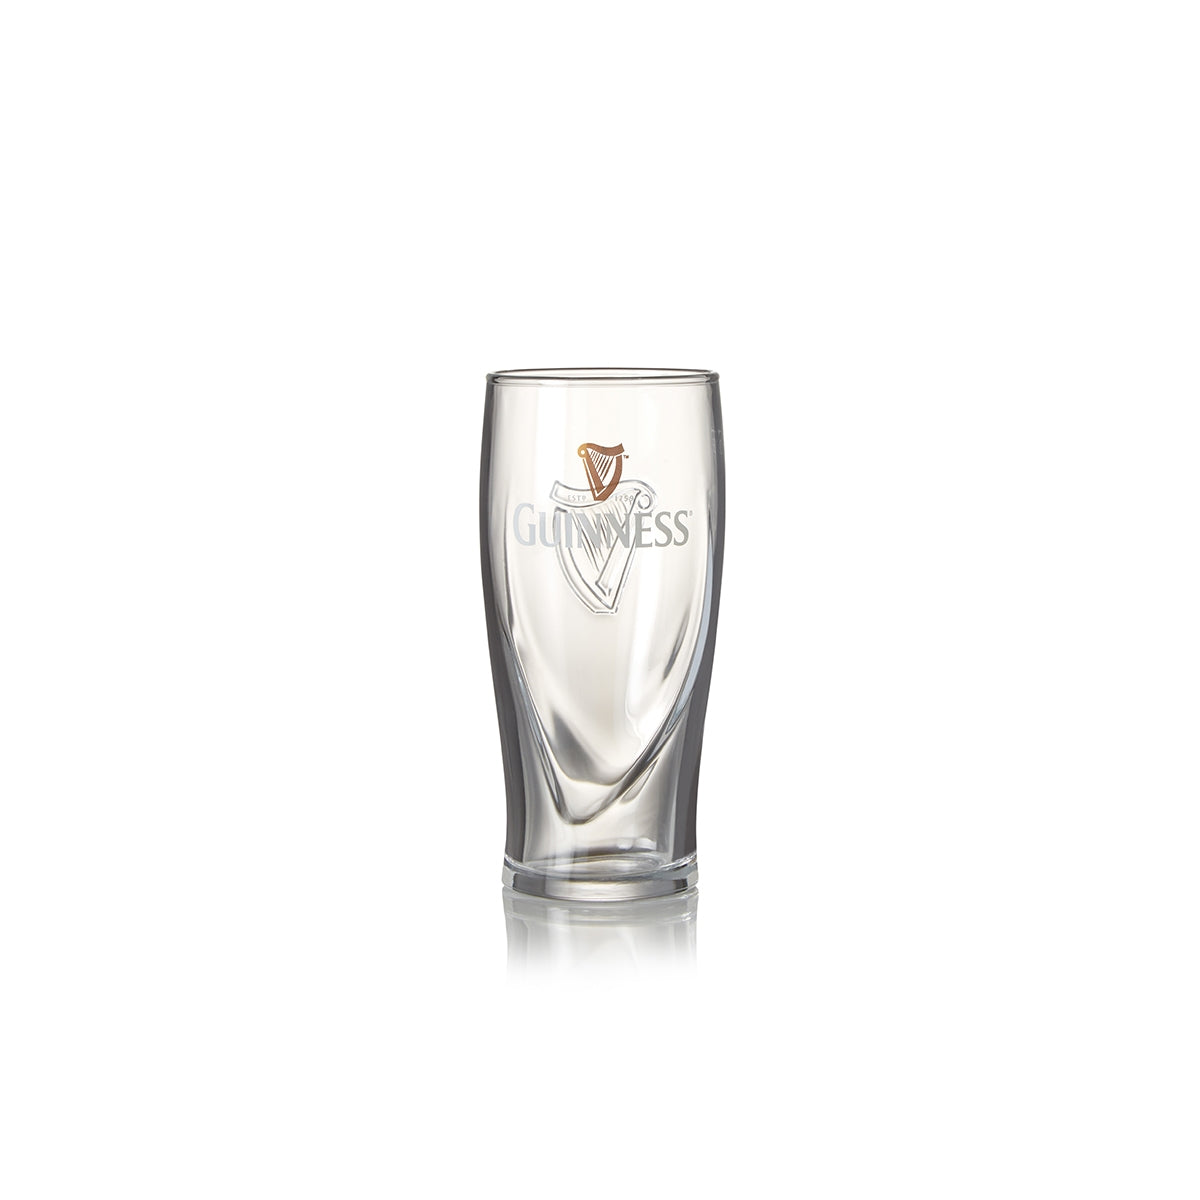 A Guinness Half Pint Glass 4 Pack on a white background.